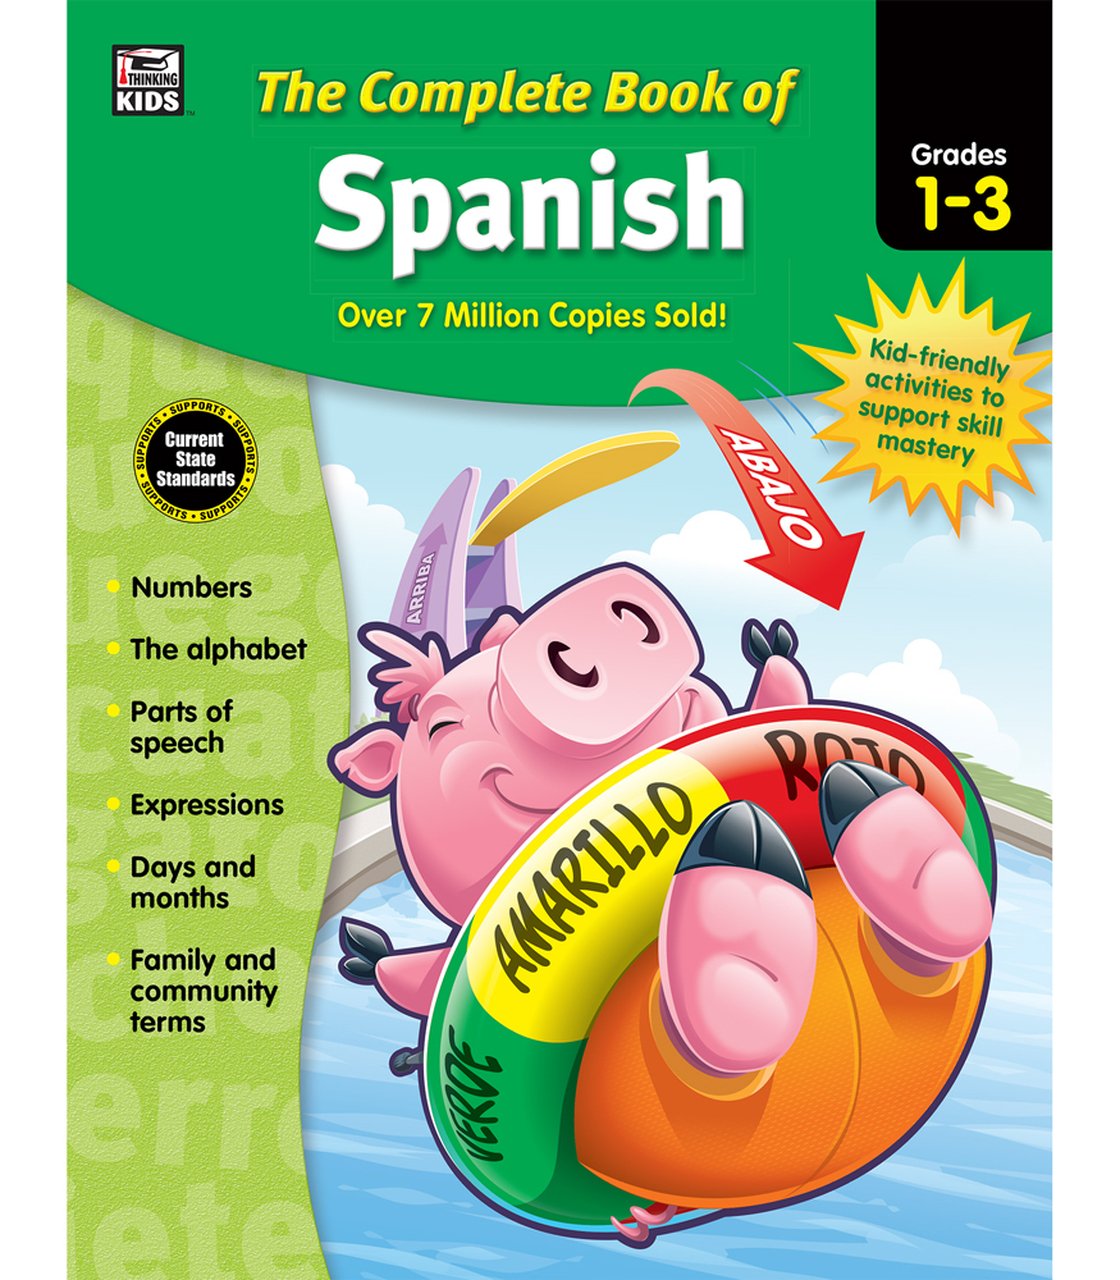 The Complete Book of Spanish Grades 1-3